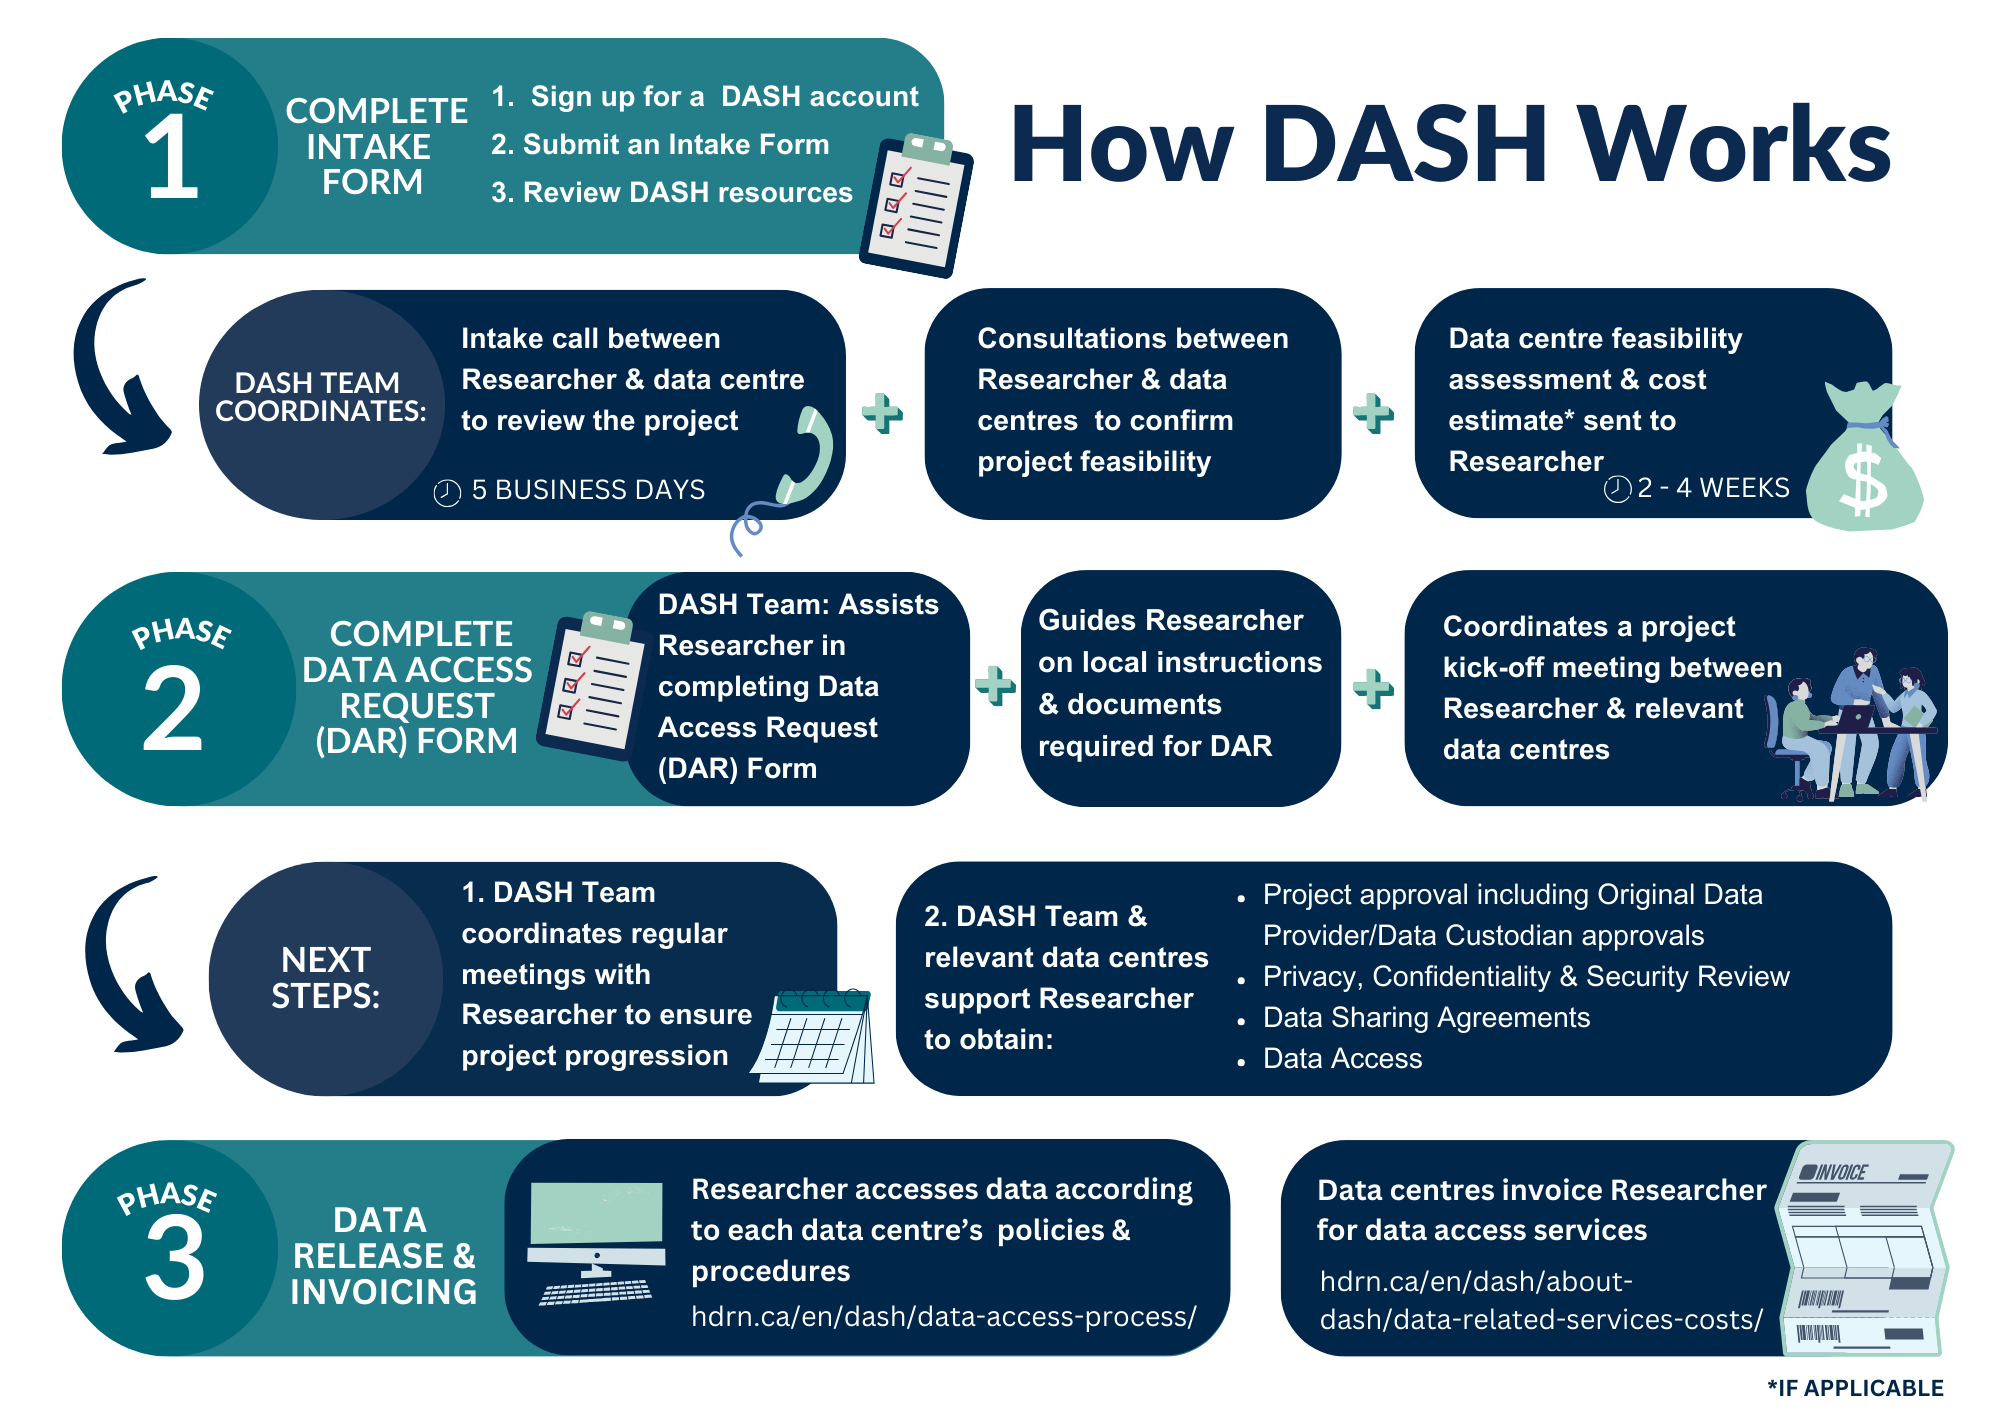 How Dash Works infographic